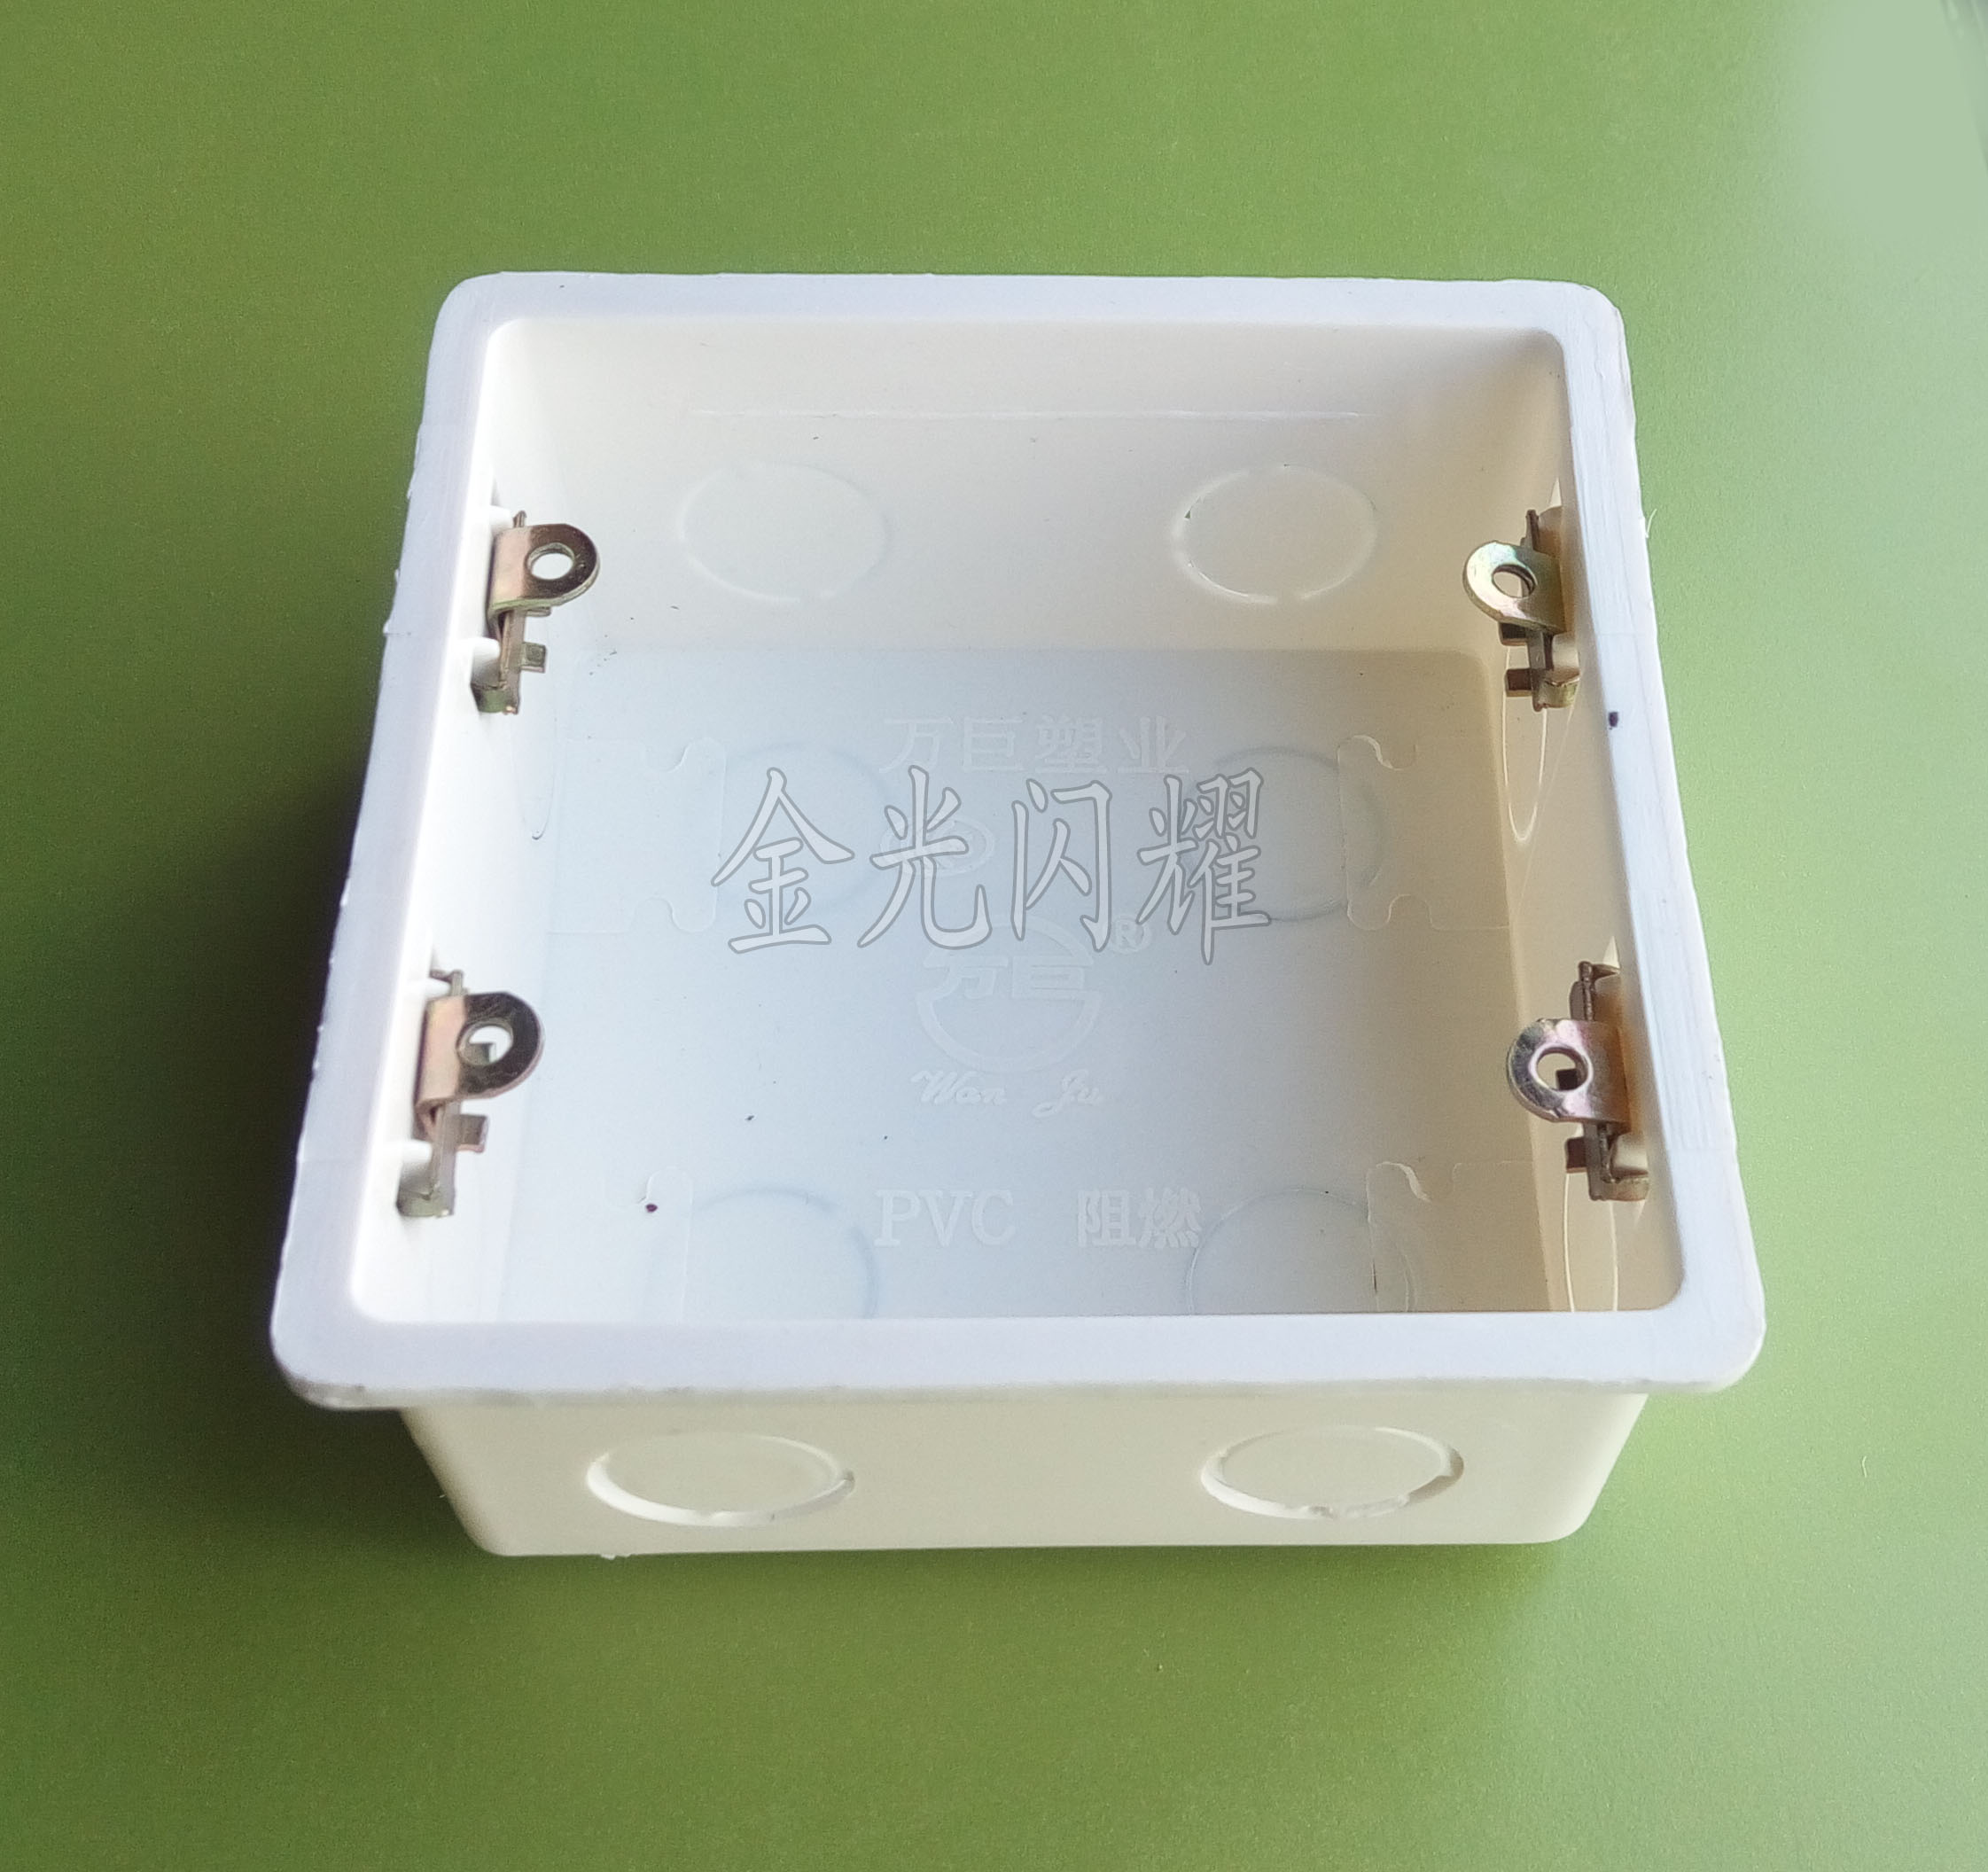 PVC120 large square box double-wire box central air conditioning control switch panel concealed bottom box Daijin Mitsubishi Hitachi